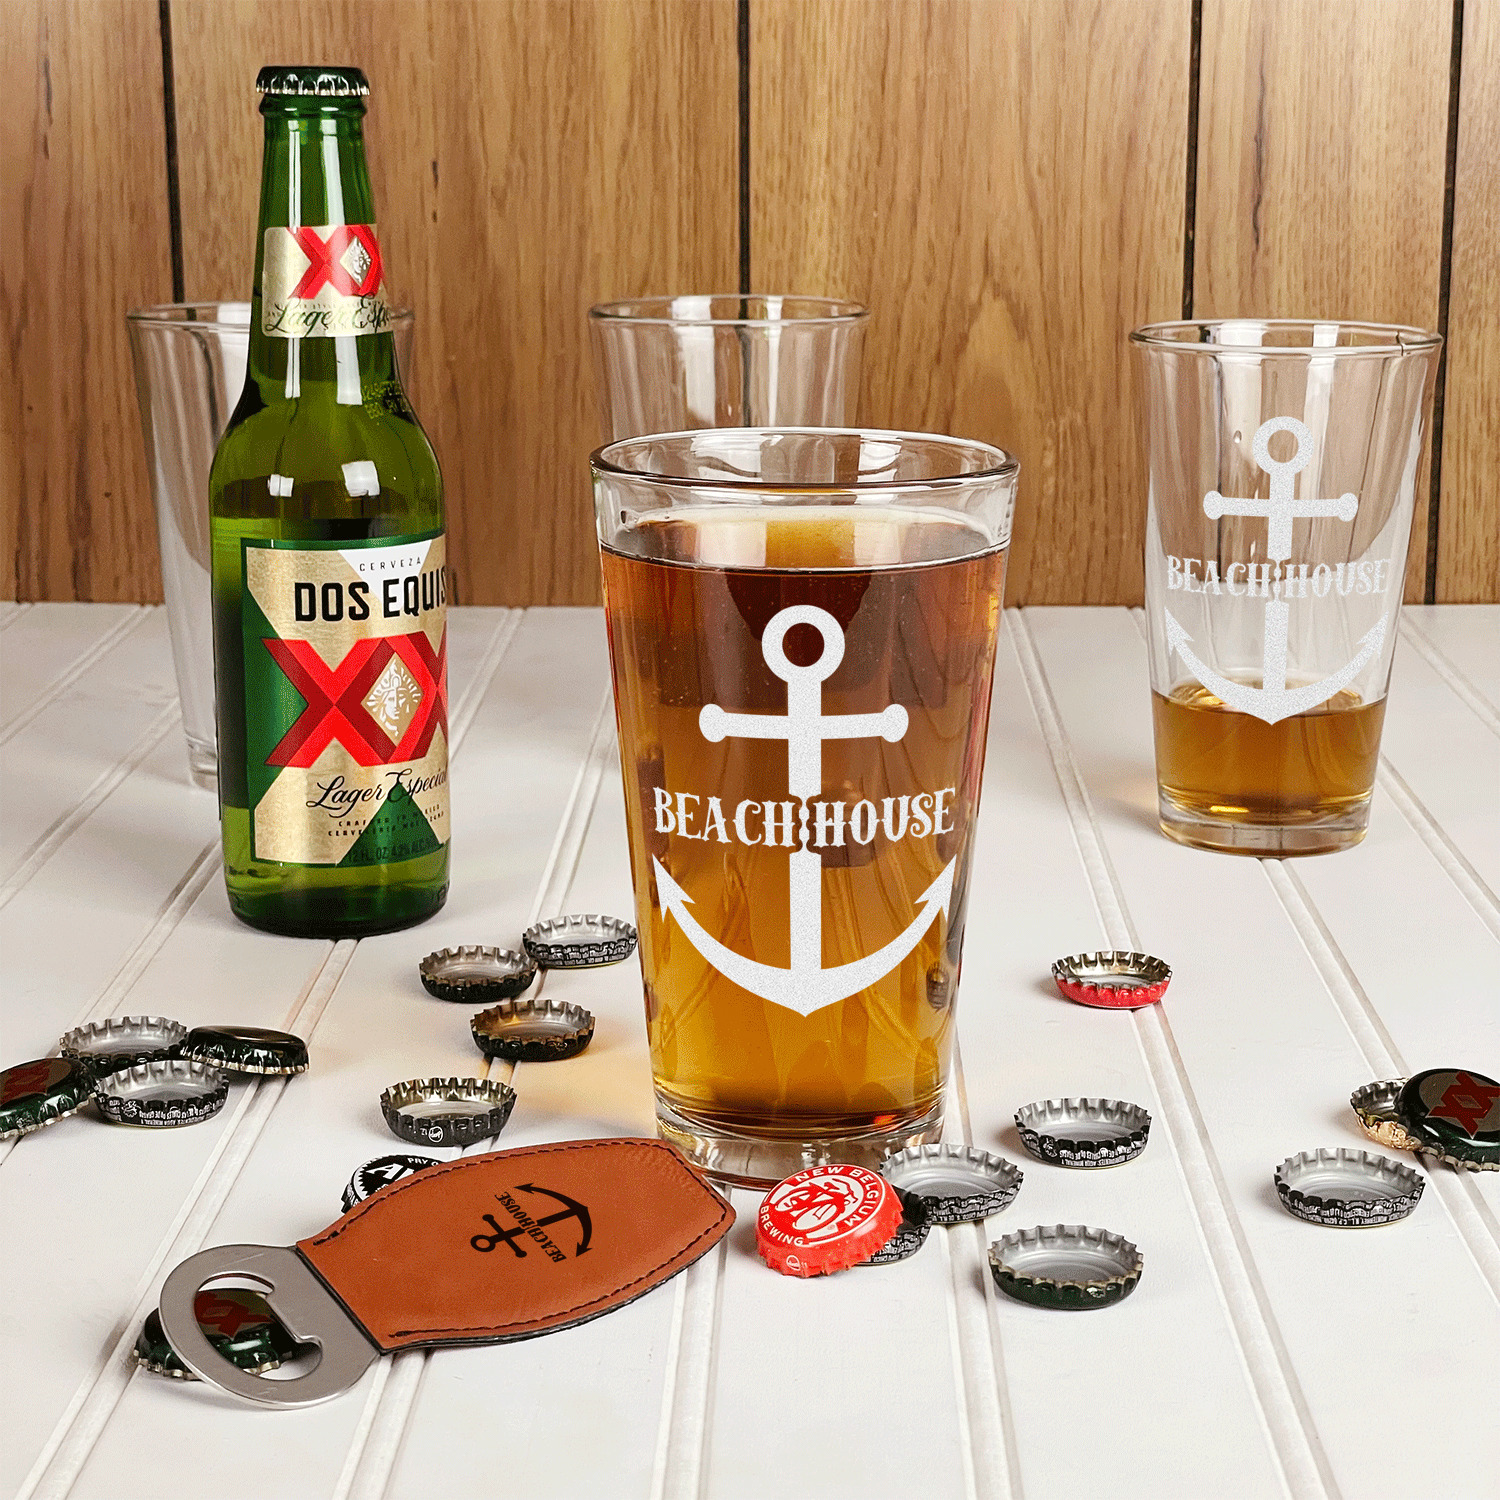 https://www.youcustomizeit.com/common/MAKE/229218/Chic-Beach-House-Pint-Glasses-In-Context.jpg?lm=1666127025